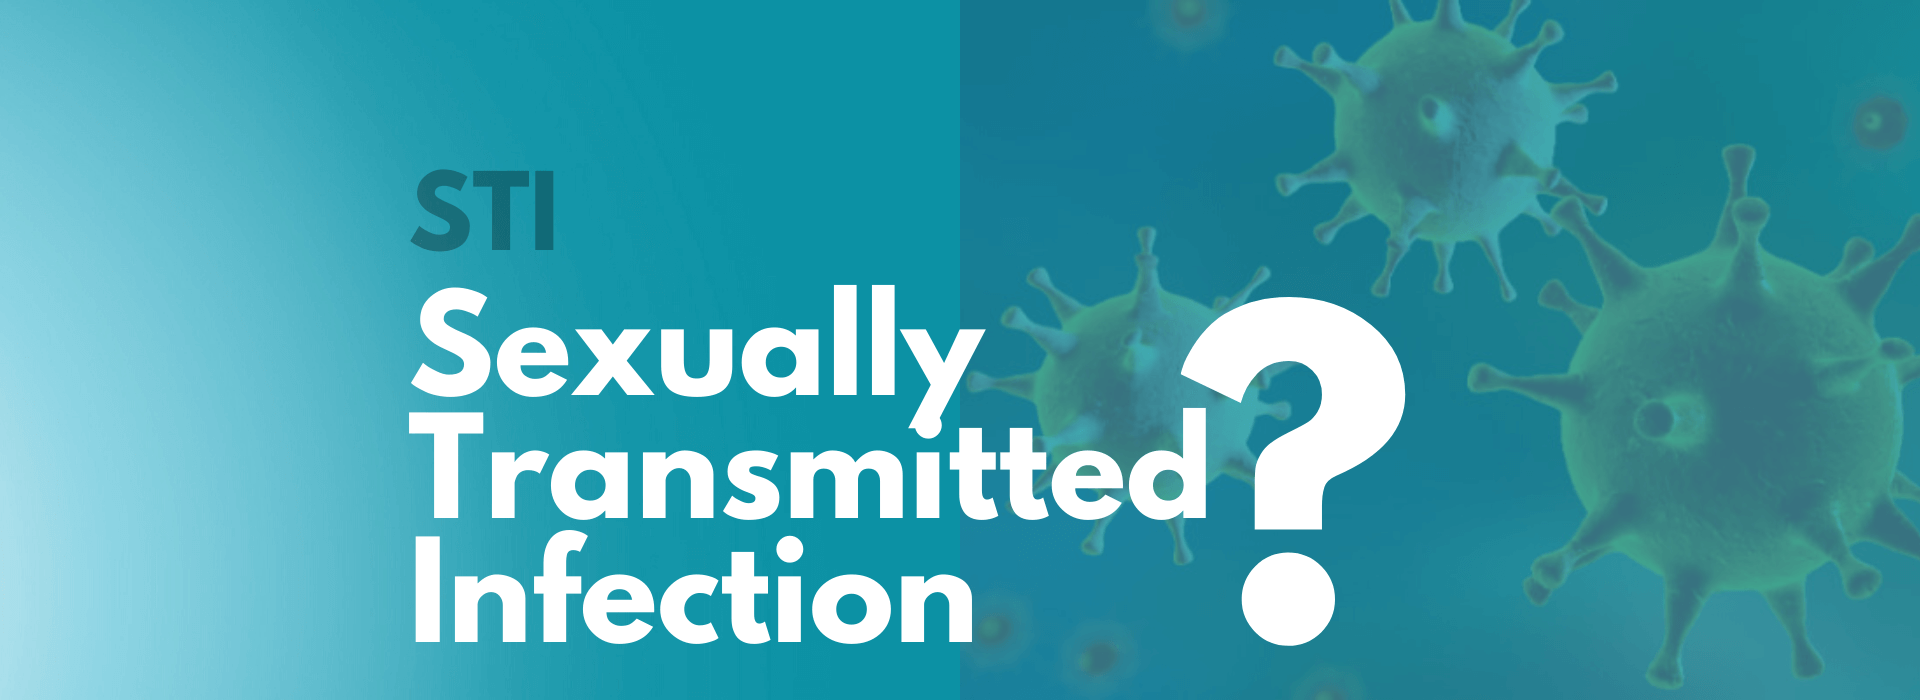 Sexually Transmitted Infection (STI)